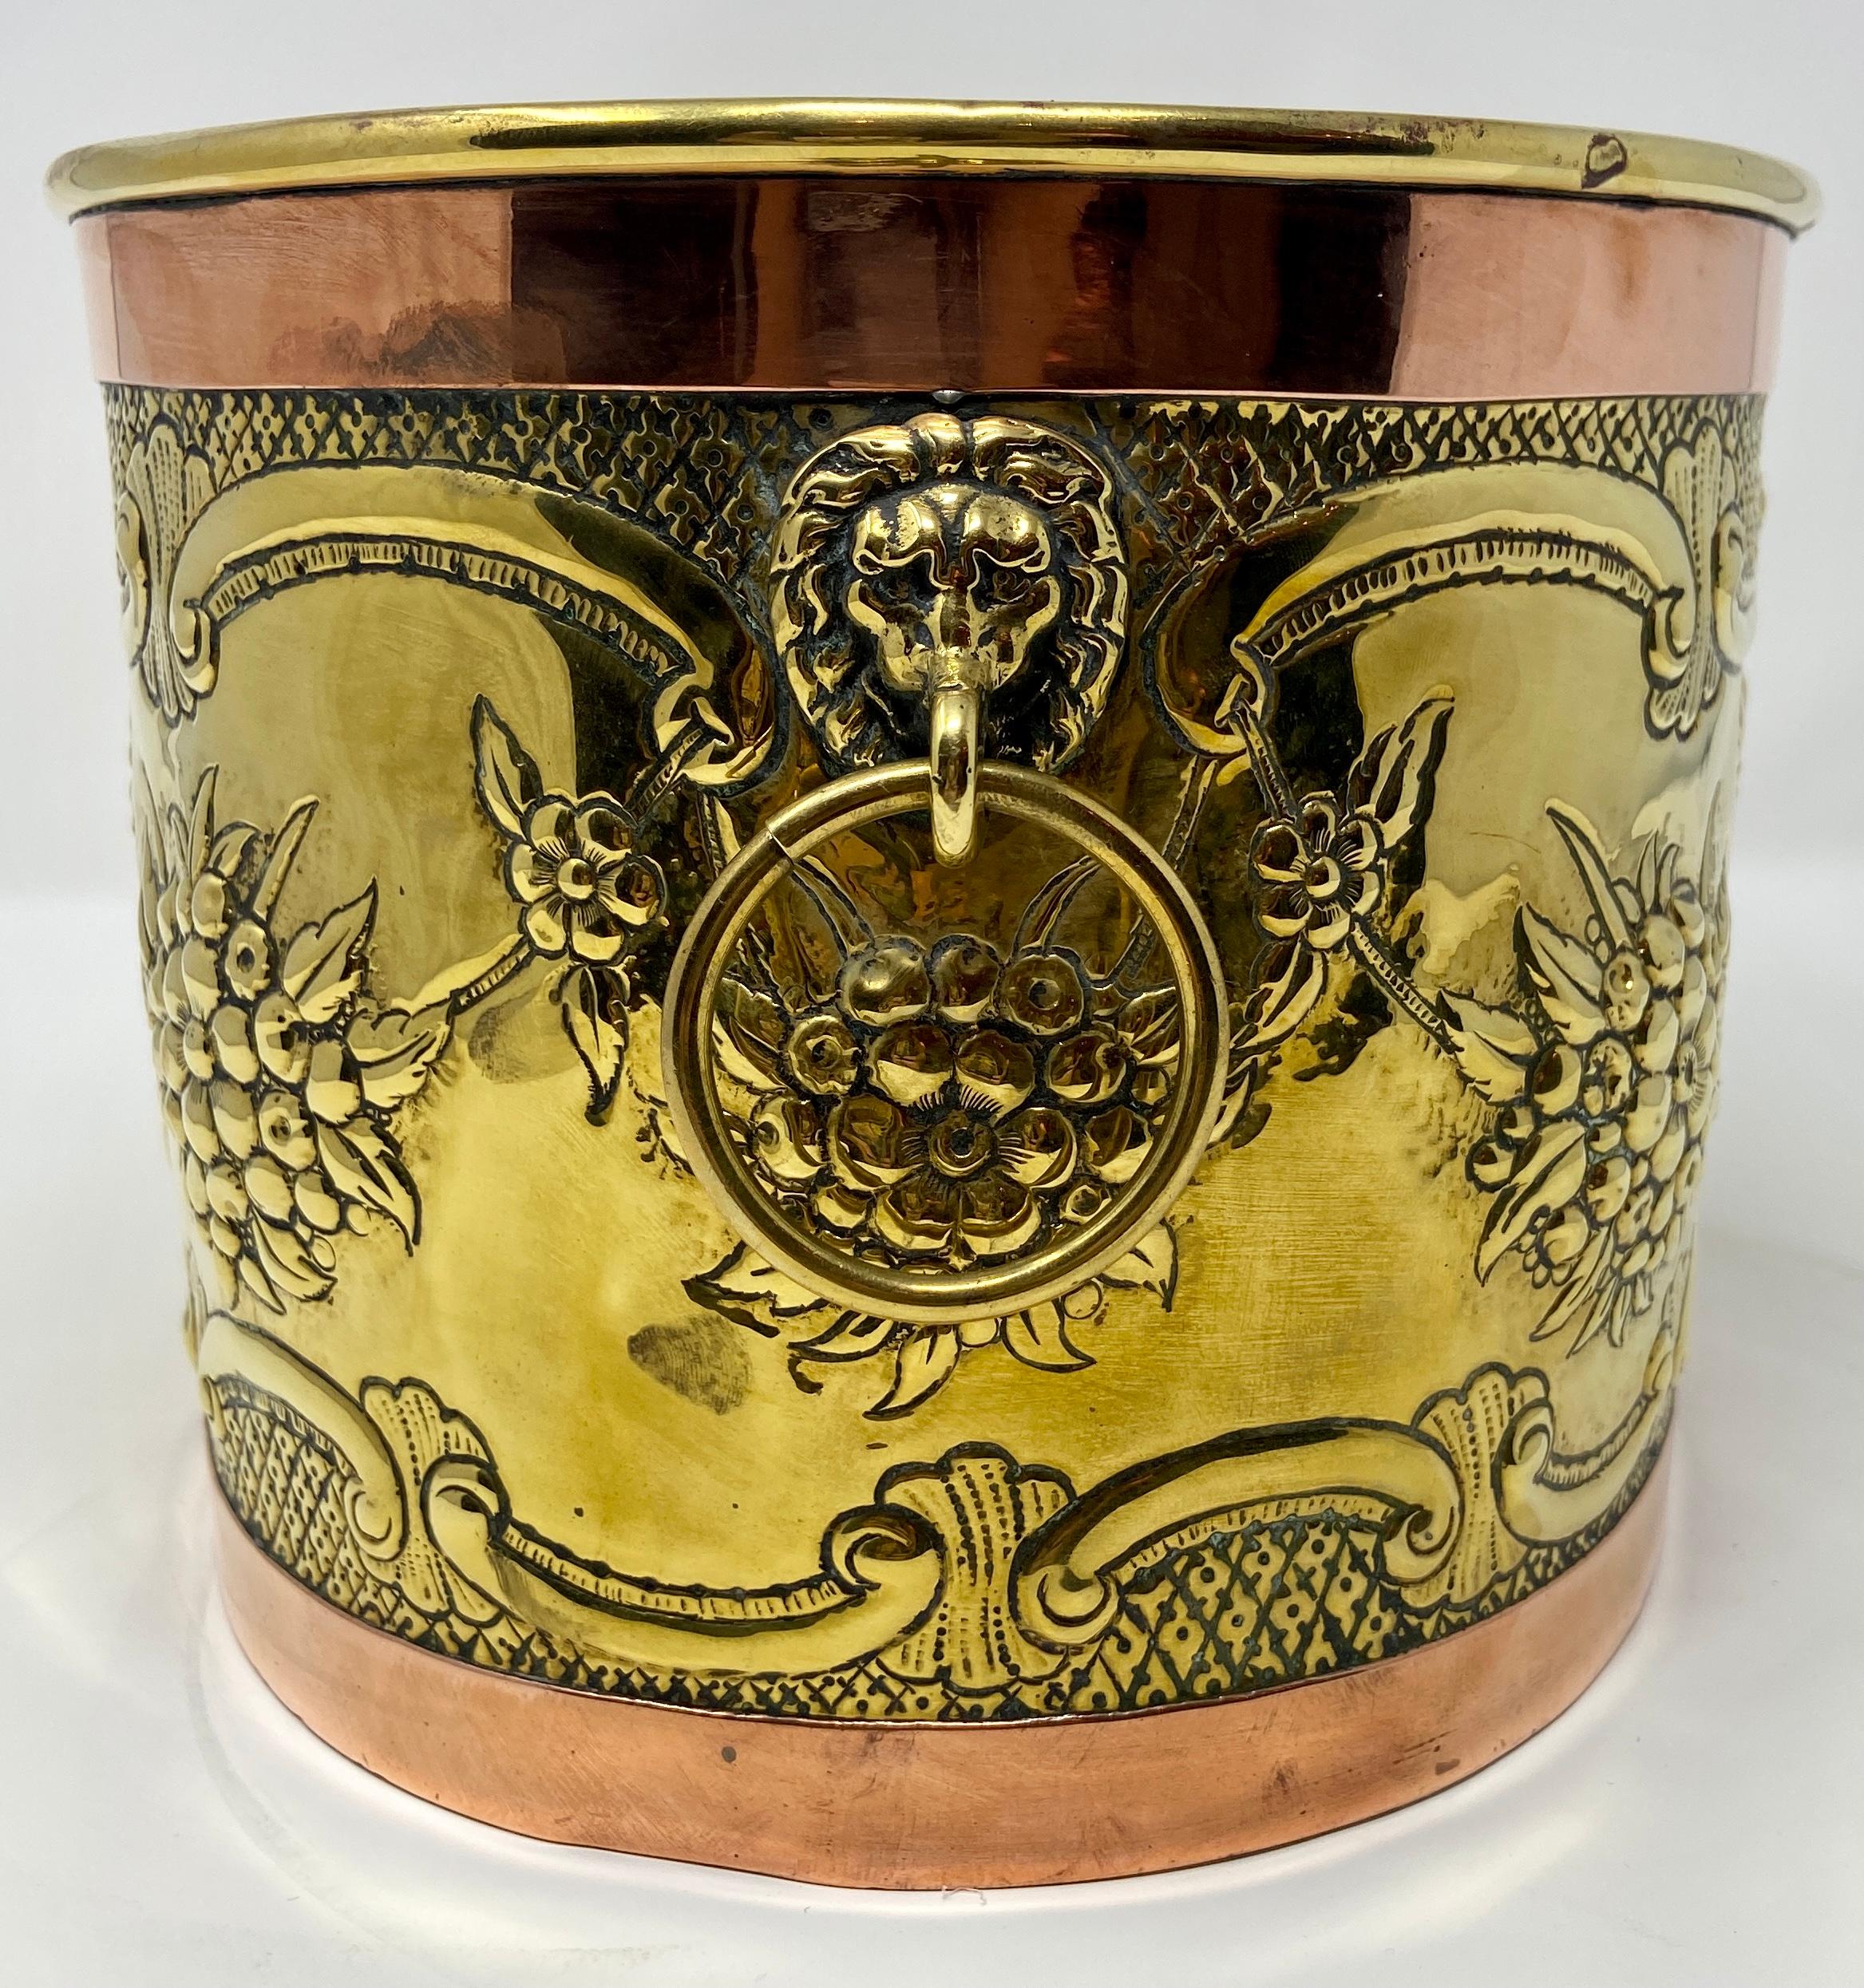 English Antique Brass and Copper Oval Planter with Liner, circa 1890-1900